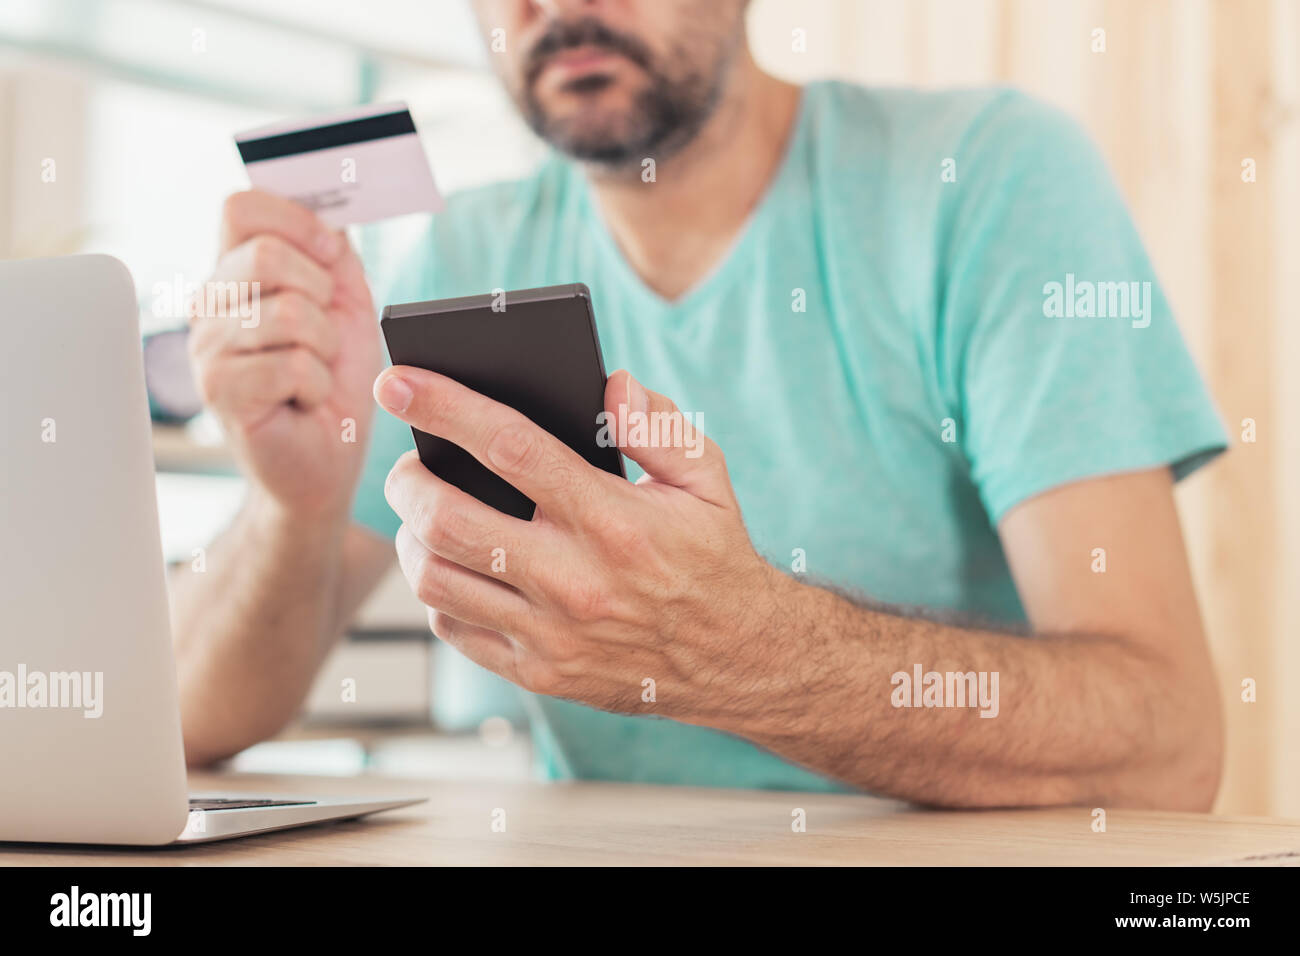 Online shopping with credit card and smart phone, casual man is using smartphone app in home office to purchase items on internet Stock Photo